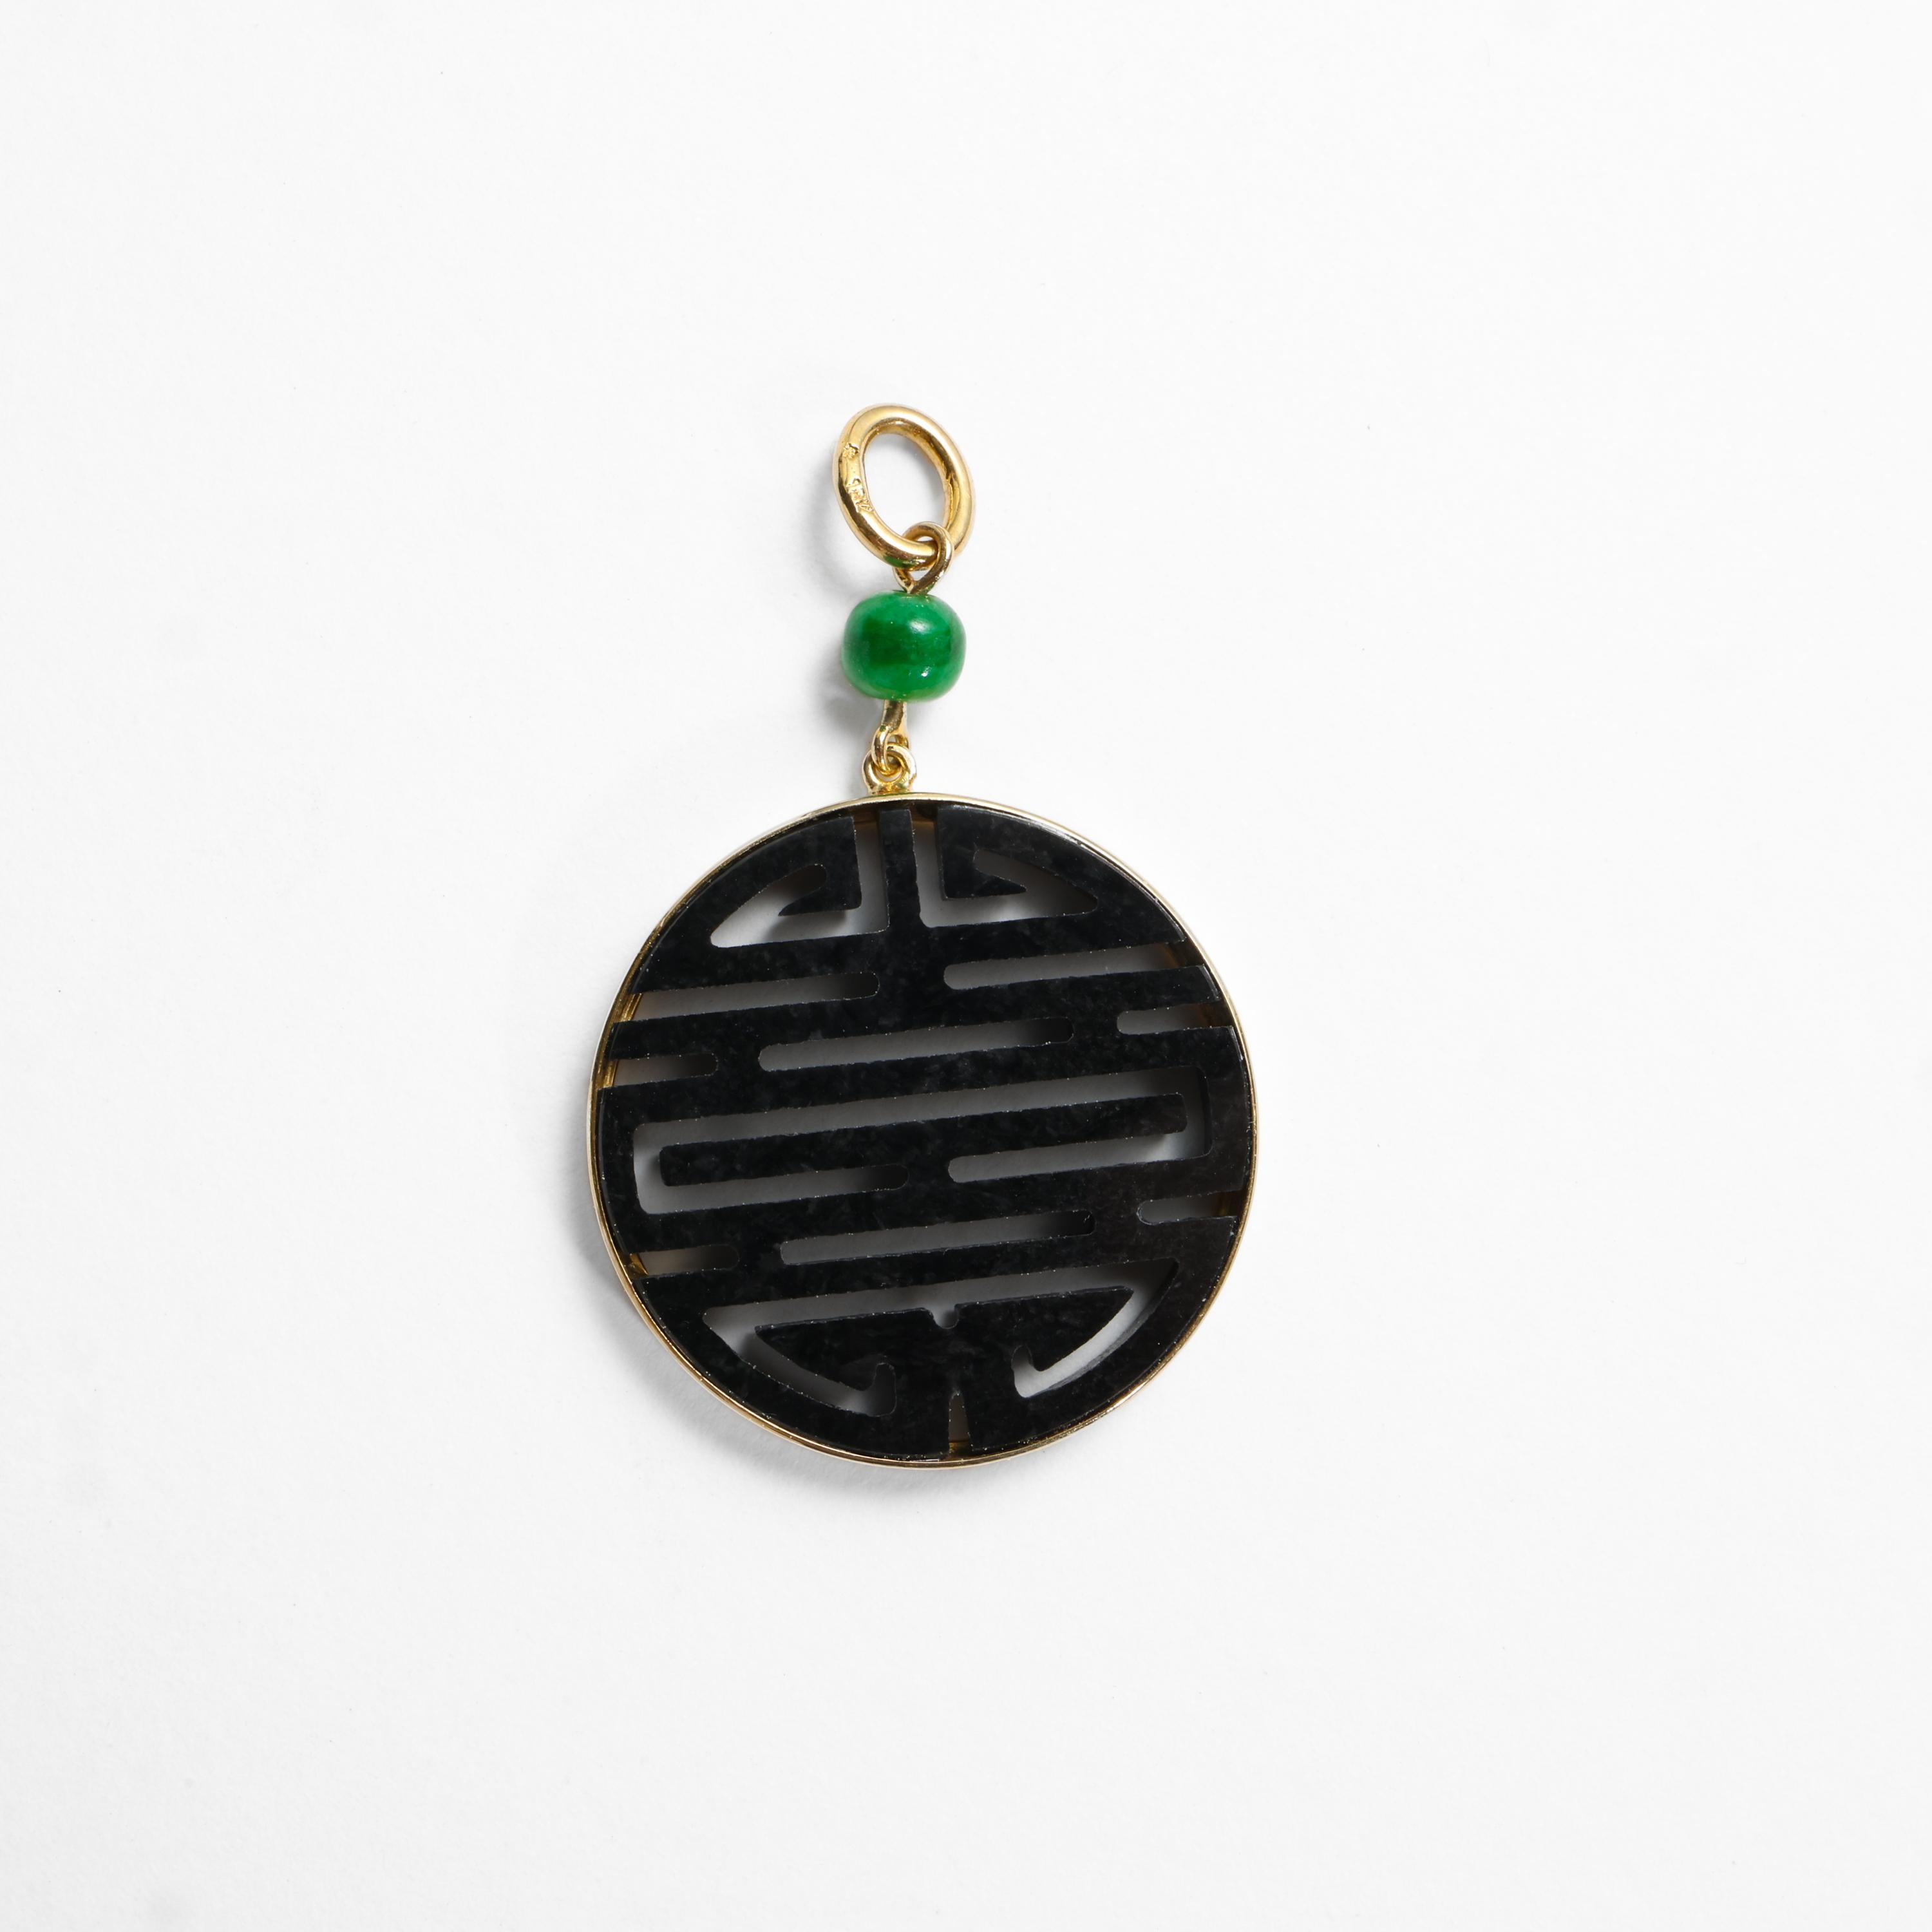 This black jade pendant features a disk of natural, untreated jade pierced with the characters for 